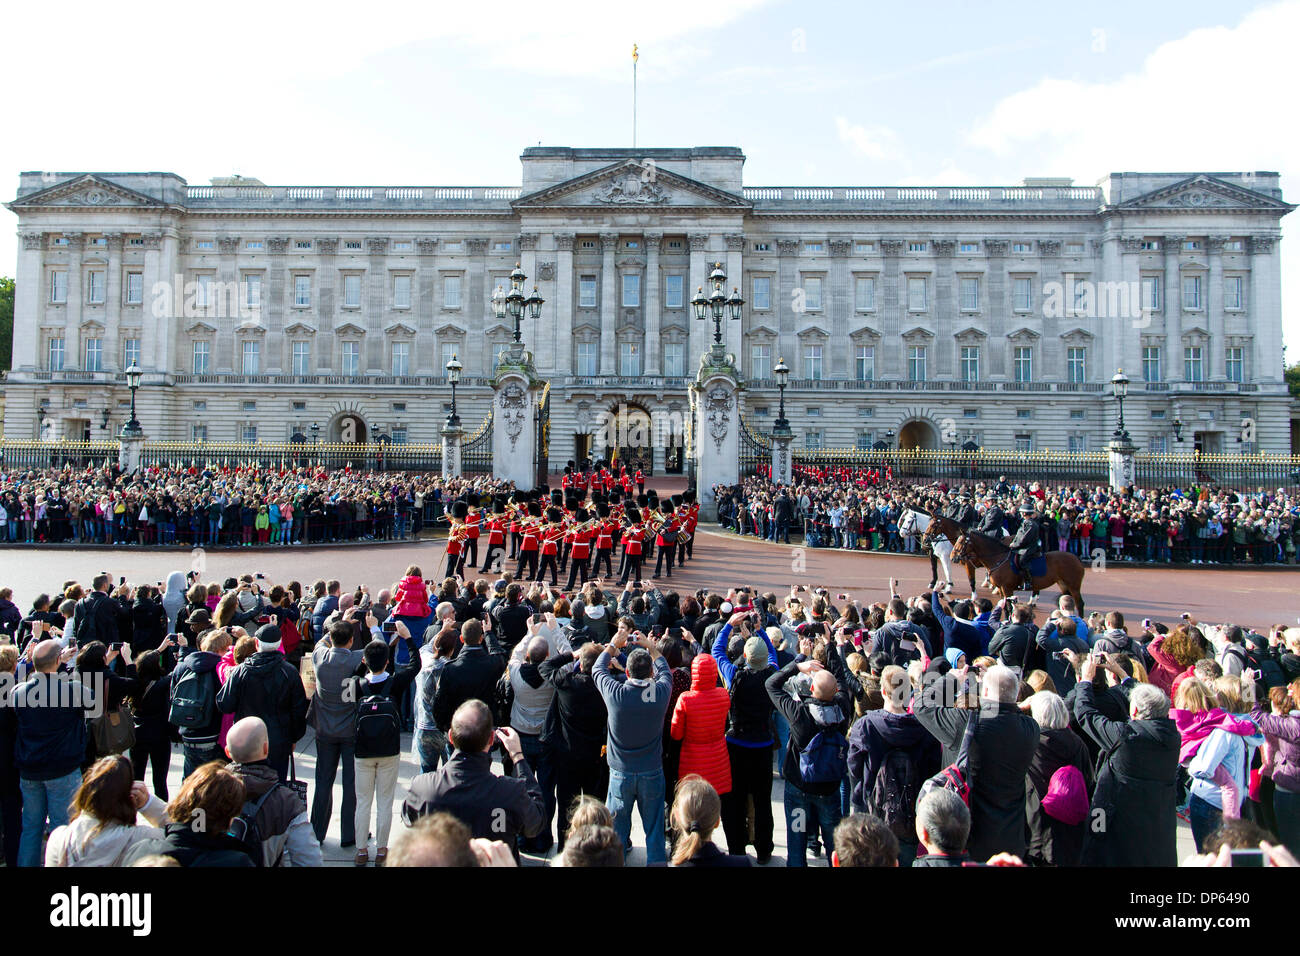 Crowds of tourists watch The Changing of the Guard outside Buckingham Palace in London. Stock Photo